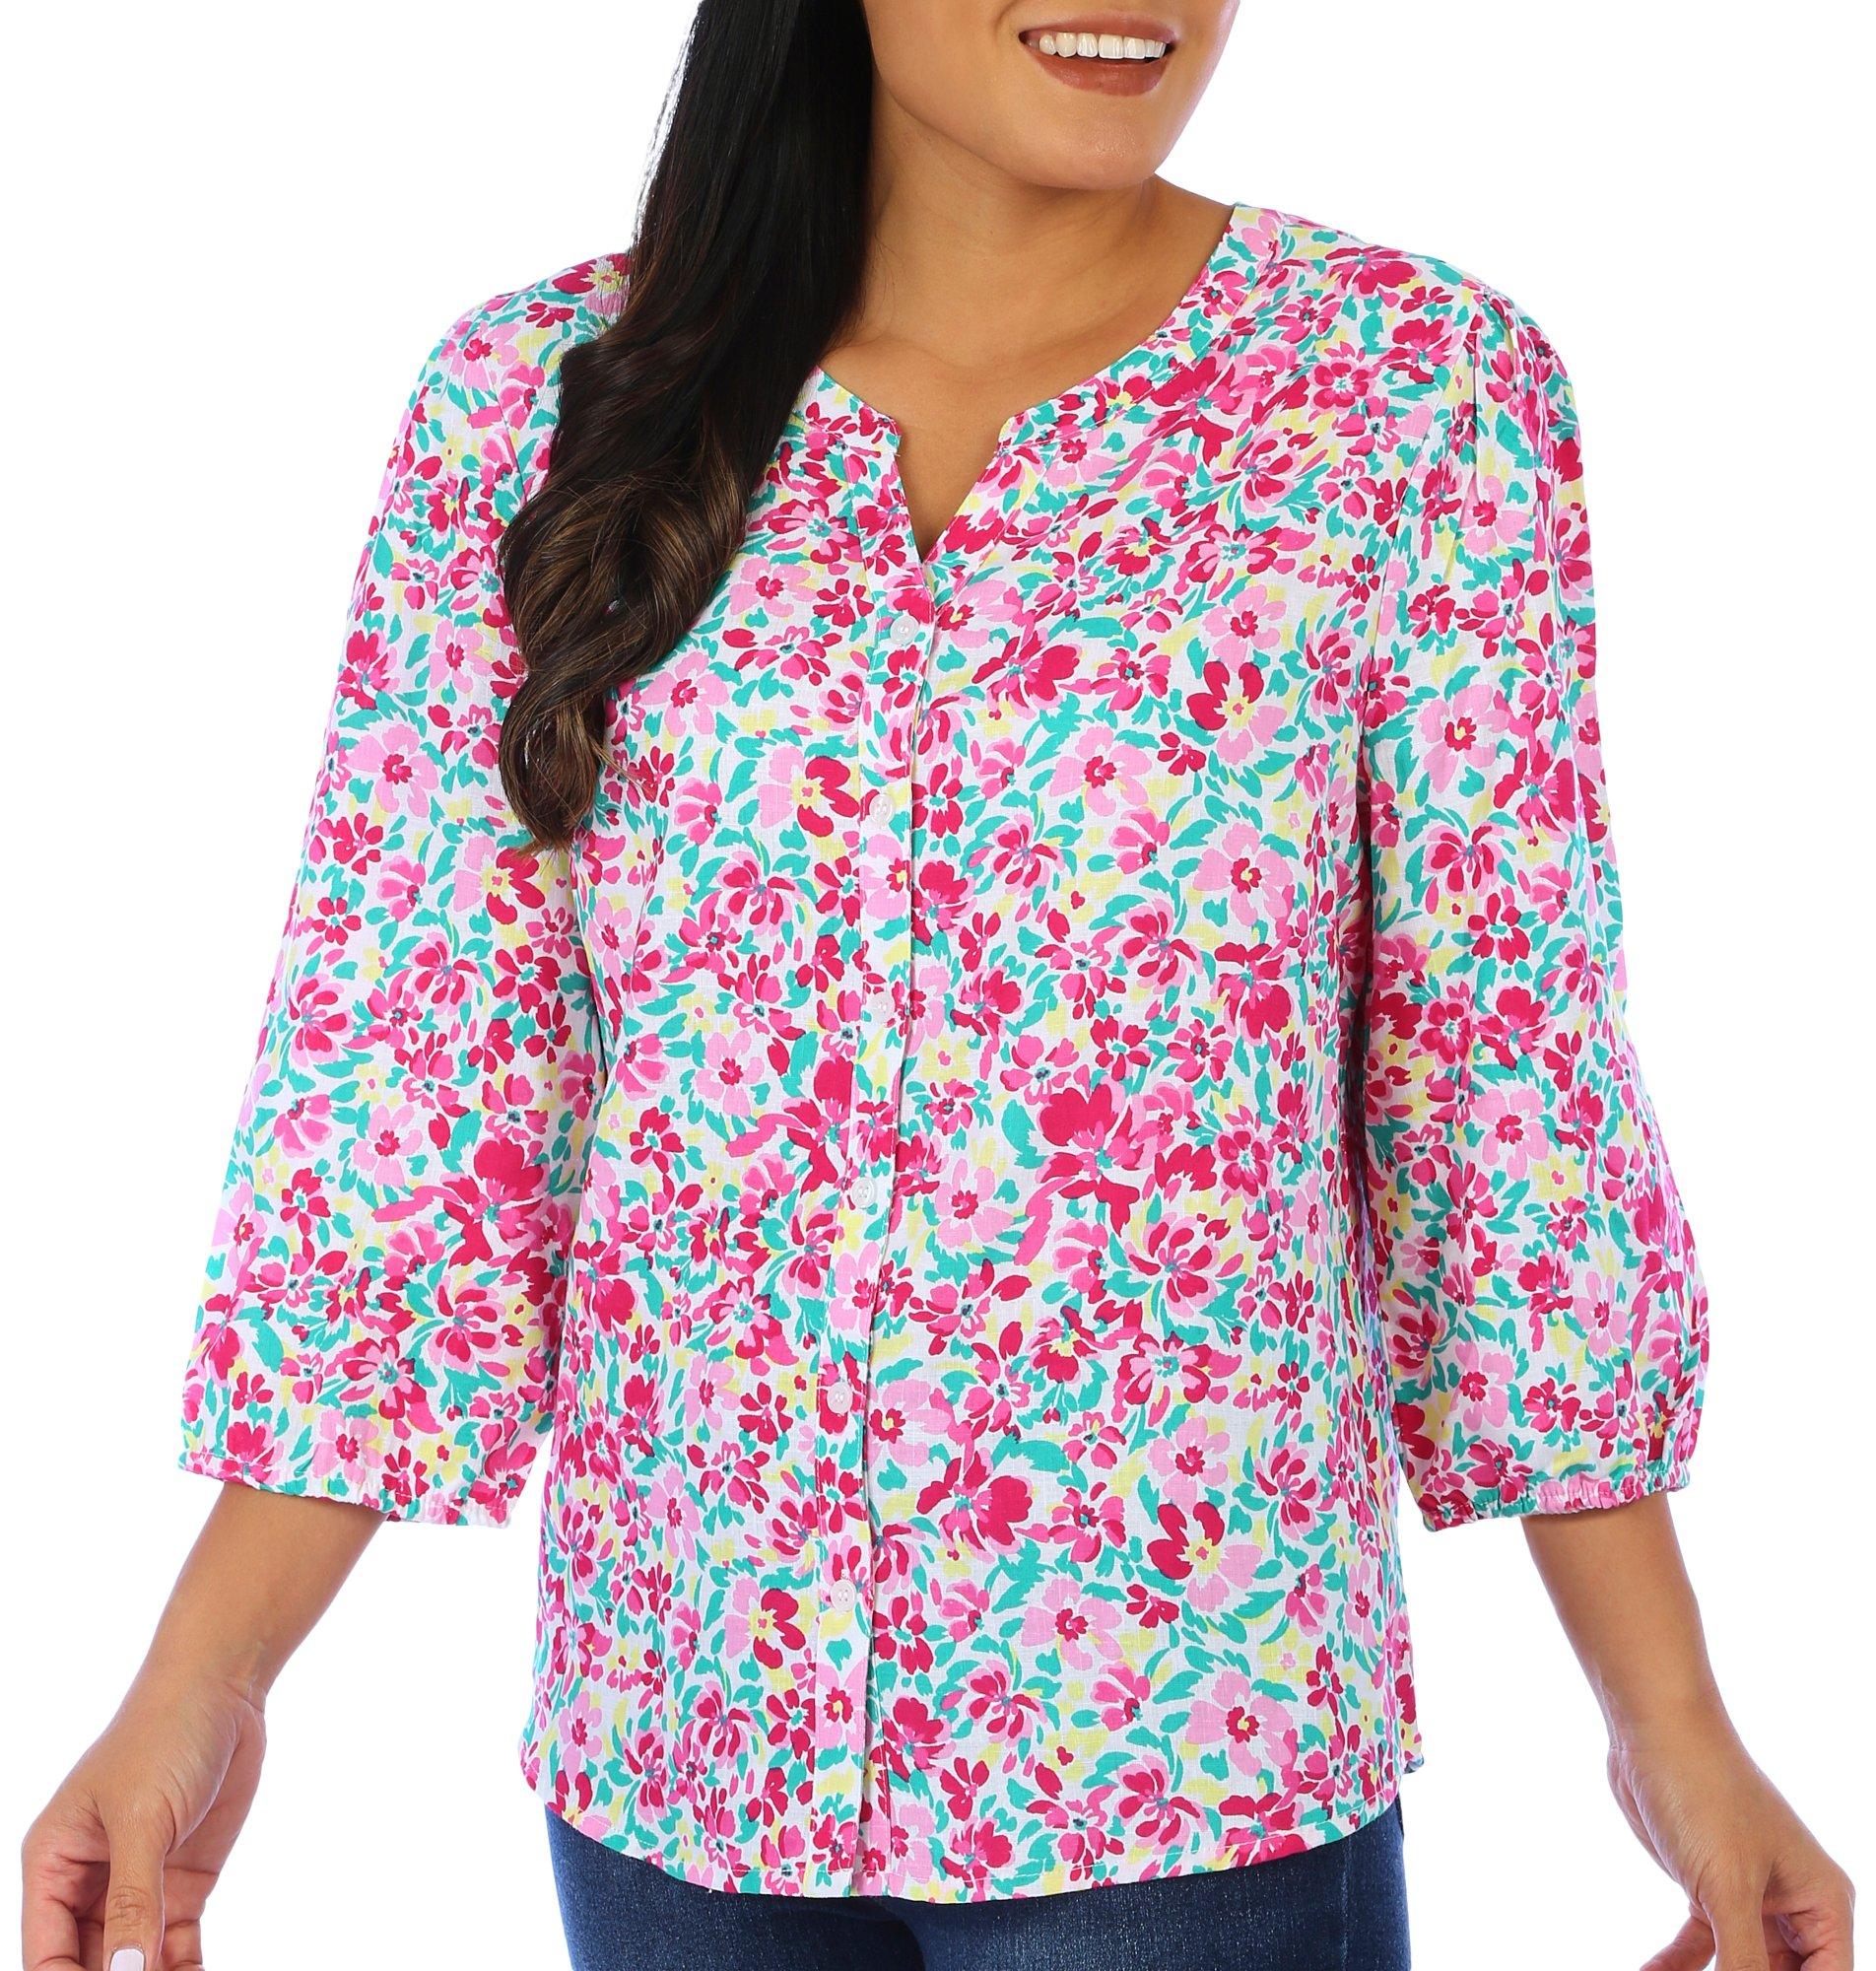 Coral Bay Womens Floral Print Button Down 3/4 Sleeve Top